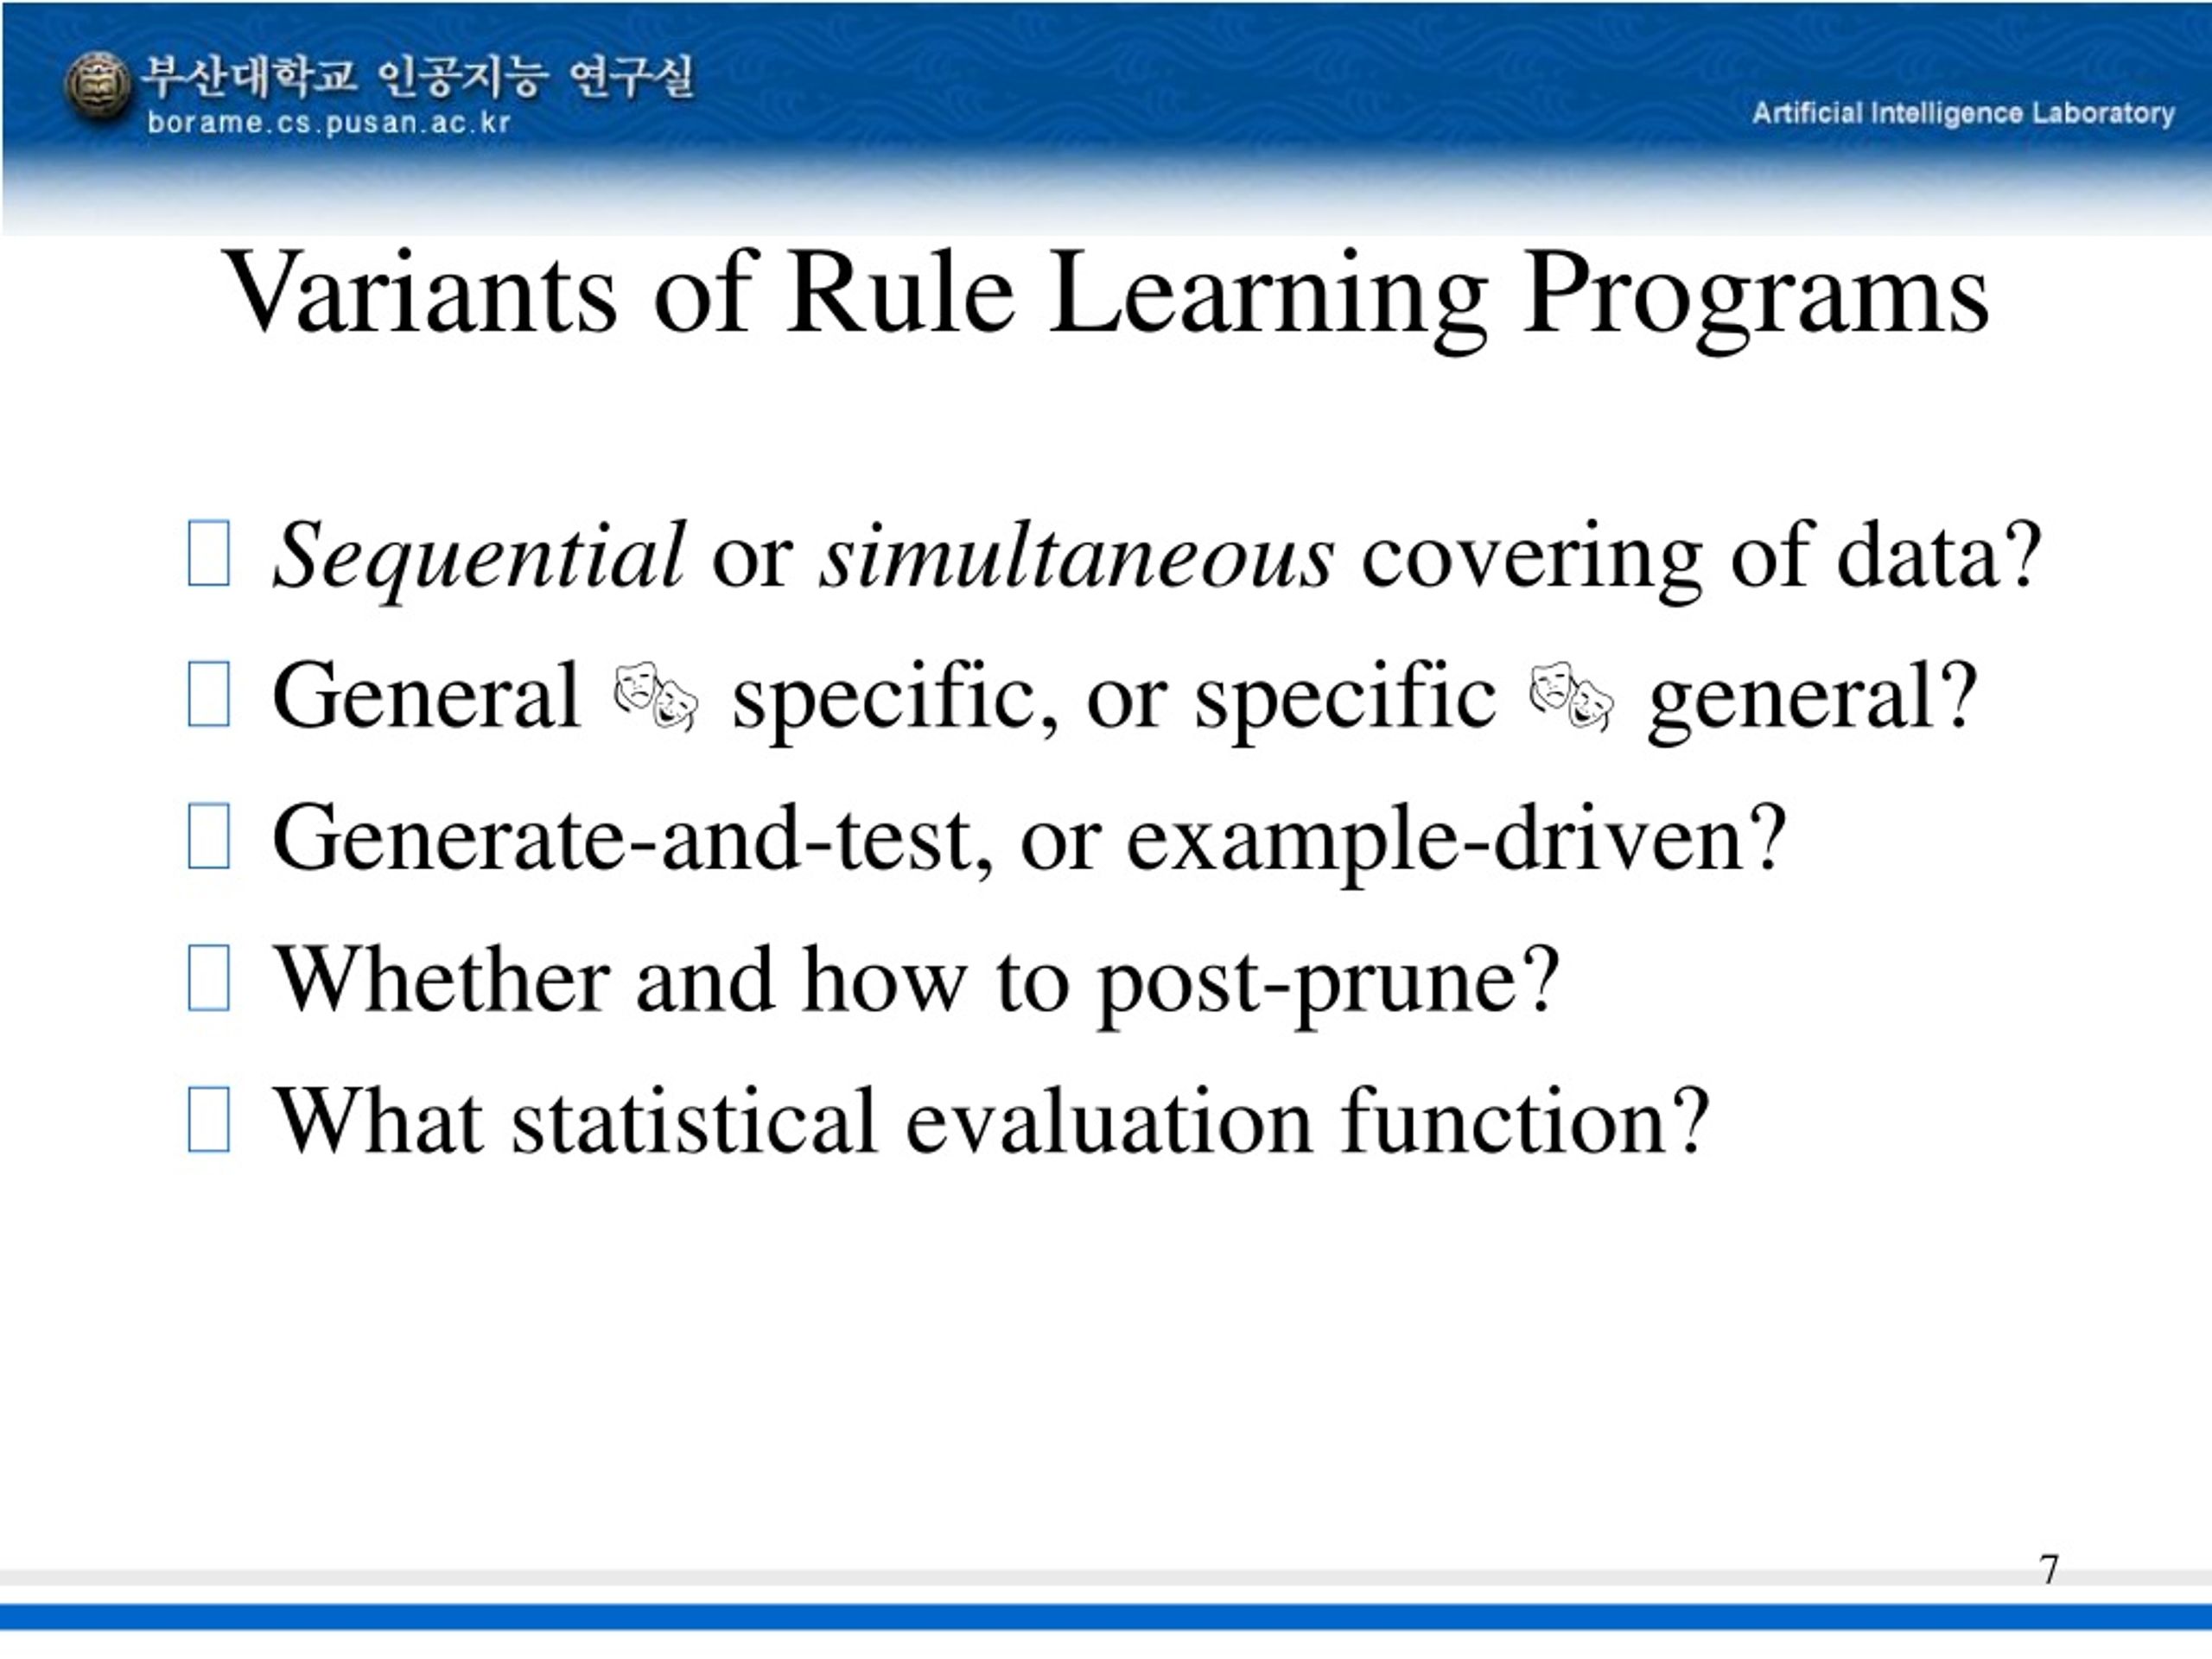 Machine Learning Chapter 10. Learning Sets of Rules Tom M